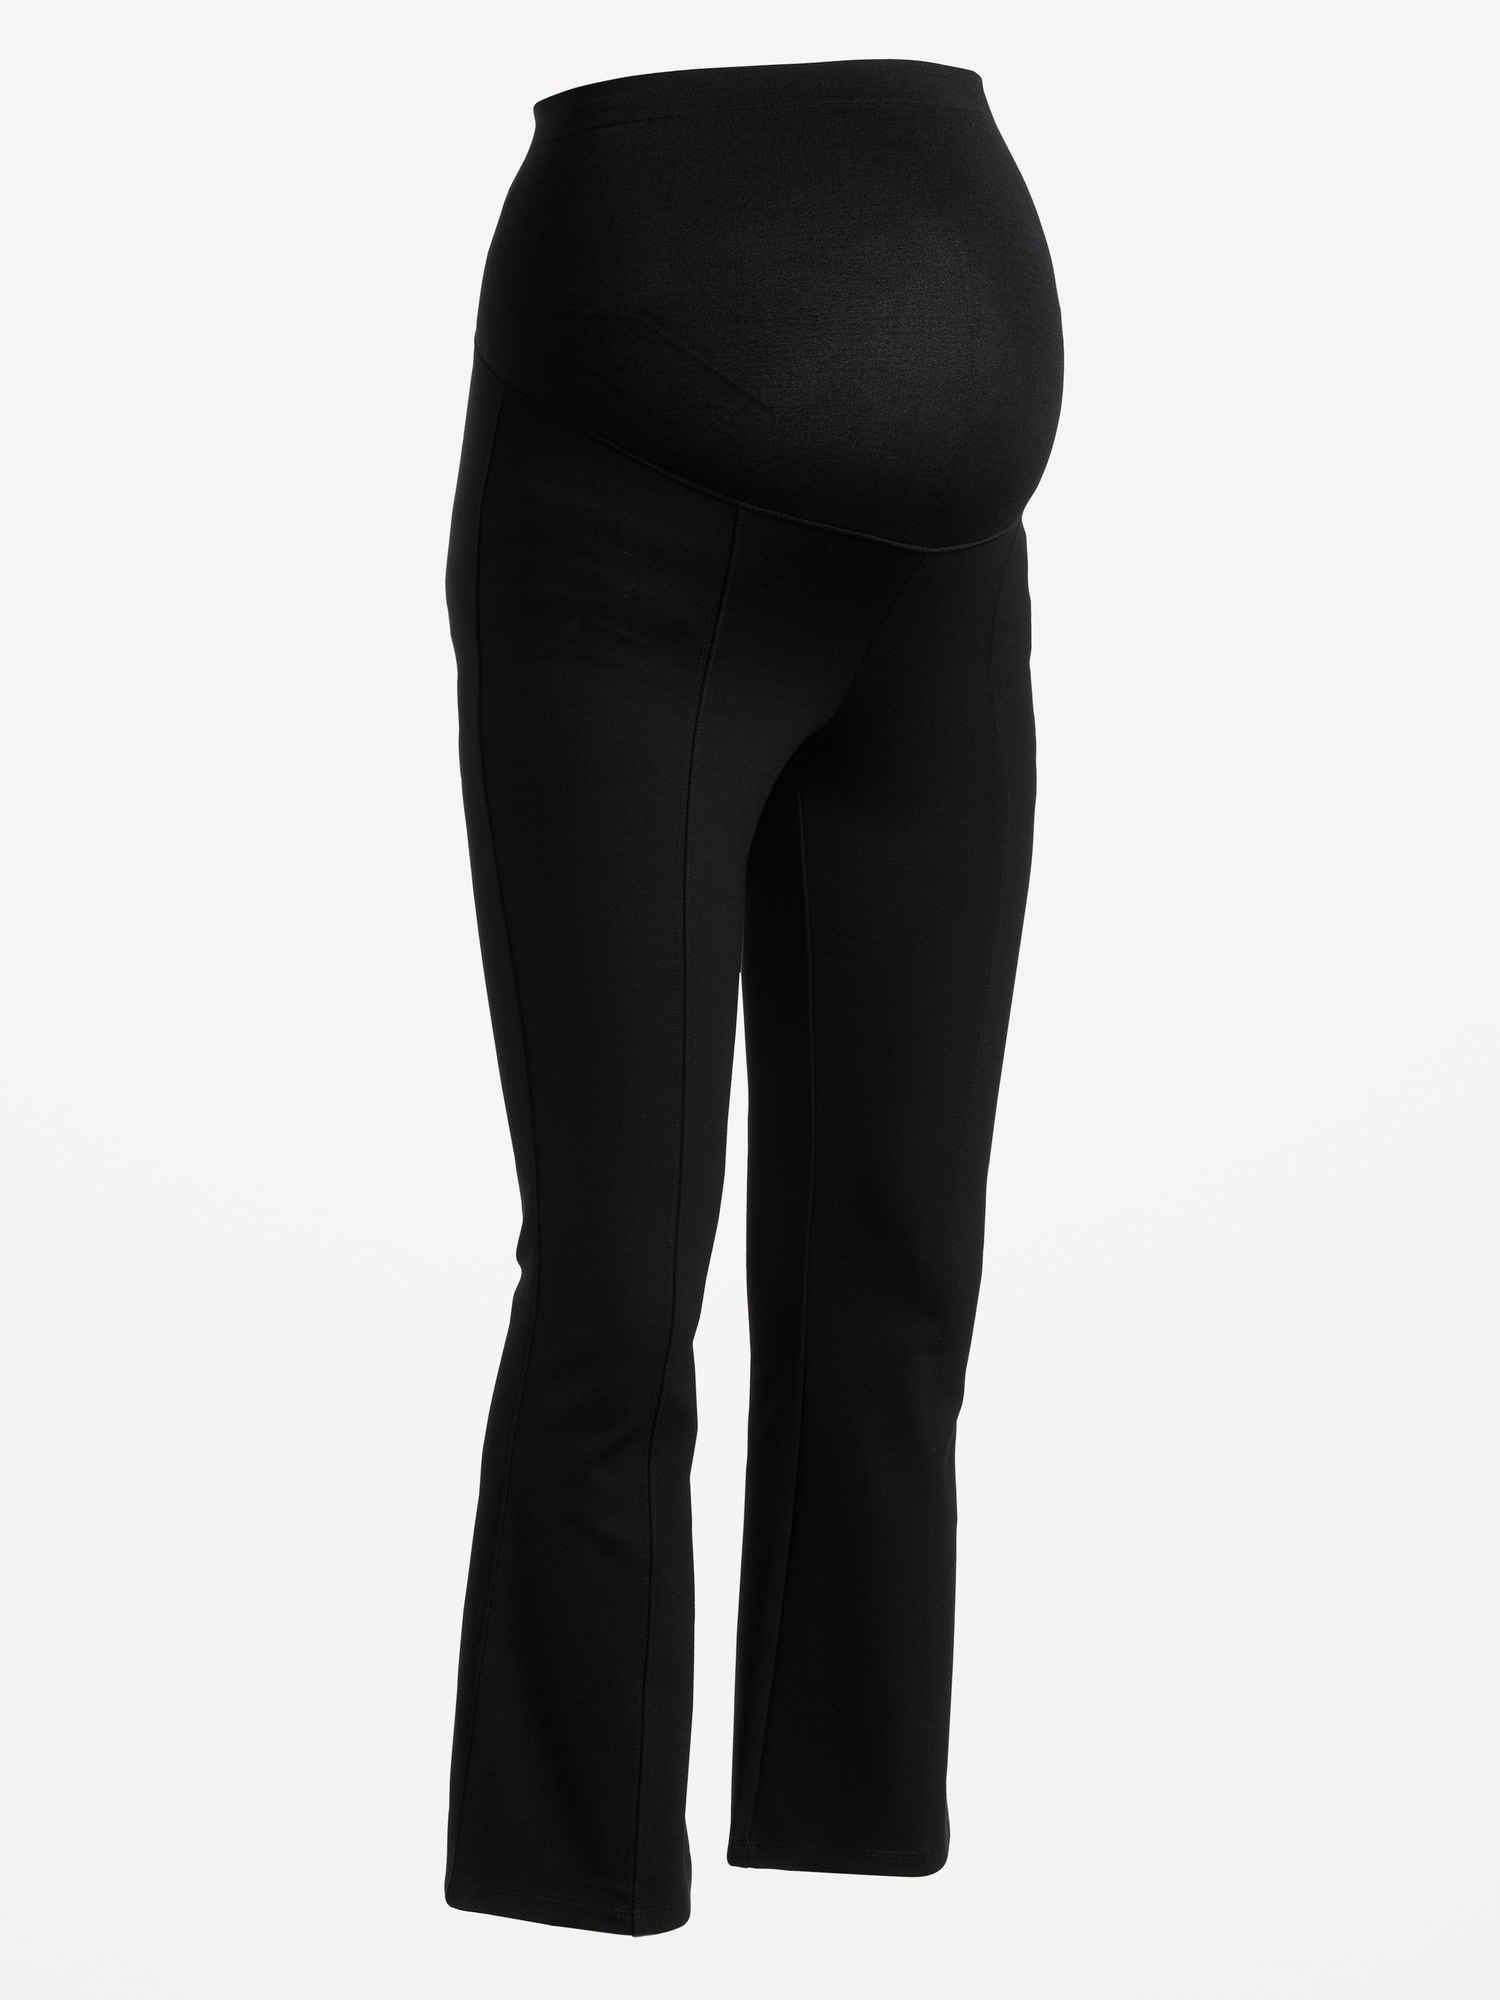 Extra High-Waisted Cloud+ Crop Leggings for Women -- 16-inch inseam